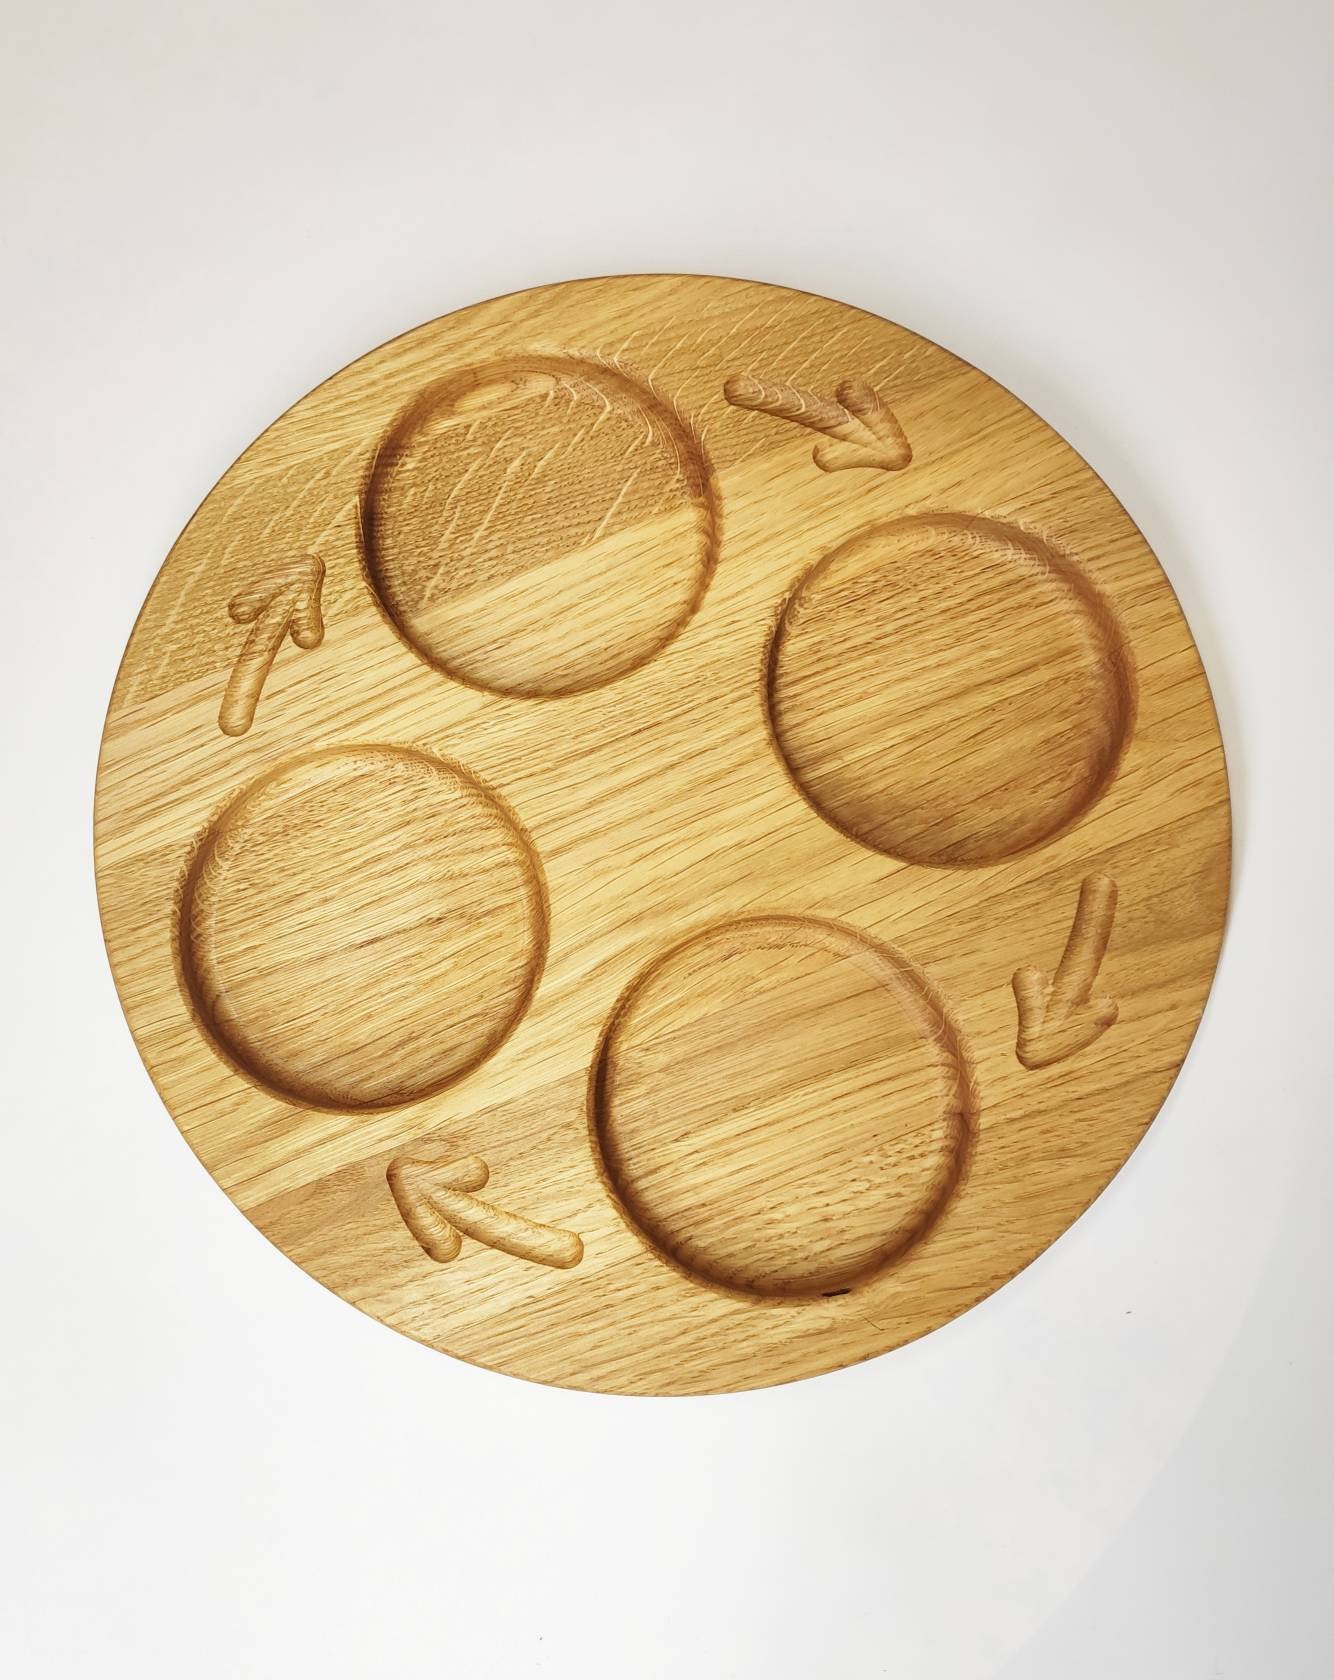 Montessori life cycle tray, with 4 sections